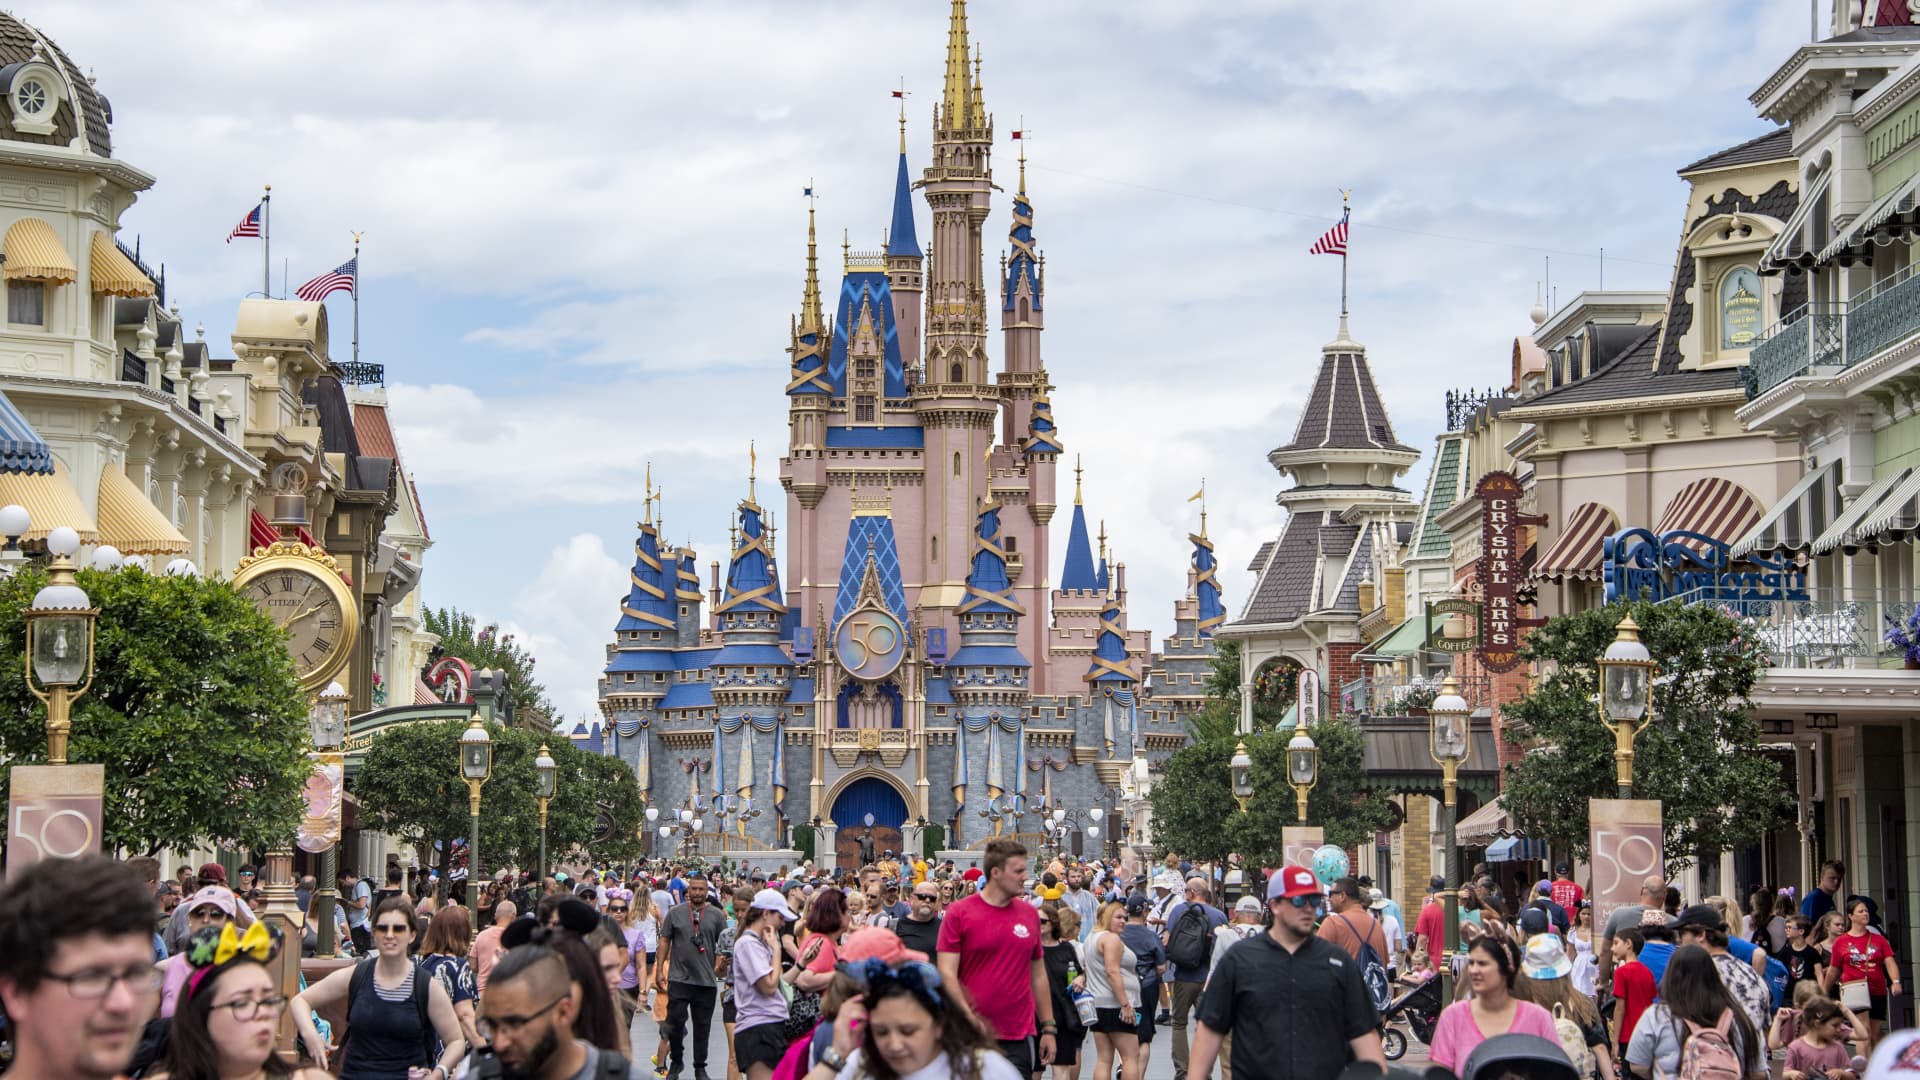 Why we’re cautiously optimistic about Disney’s new multibillion dollar theme park investment